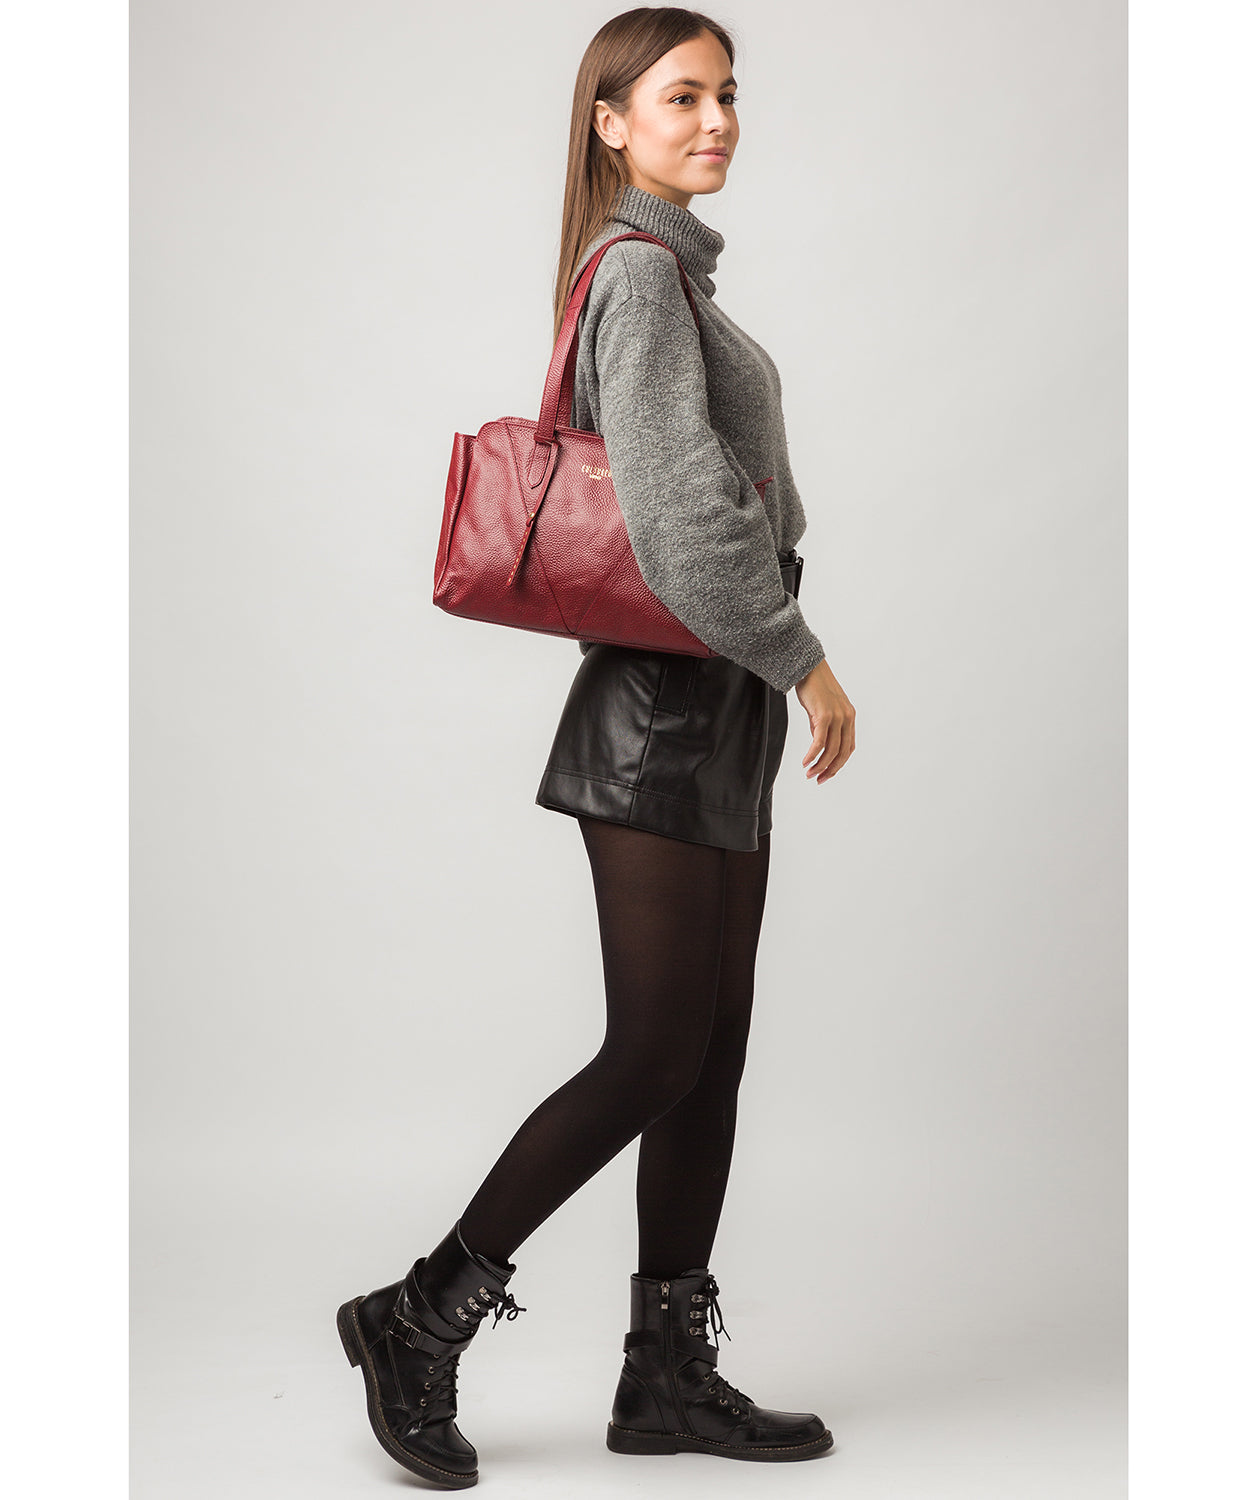 Red Leather Shoulder Bag 'Greta' by Cultured London – Pure Luxuries London